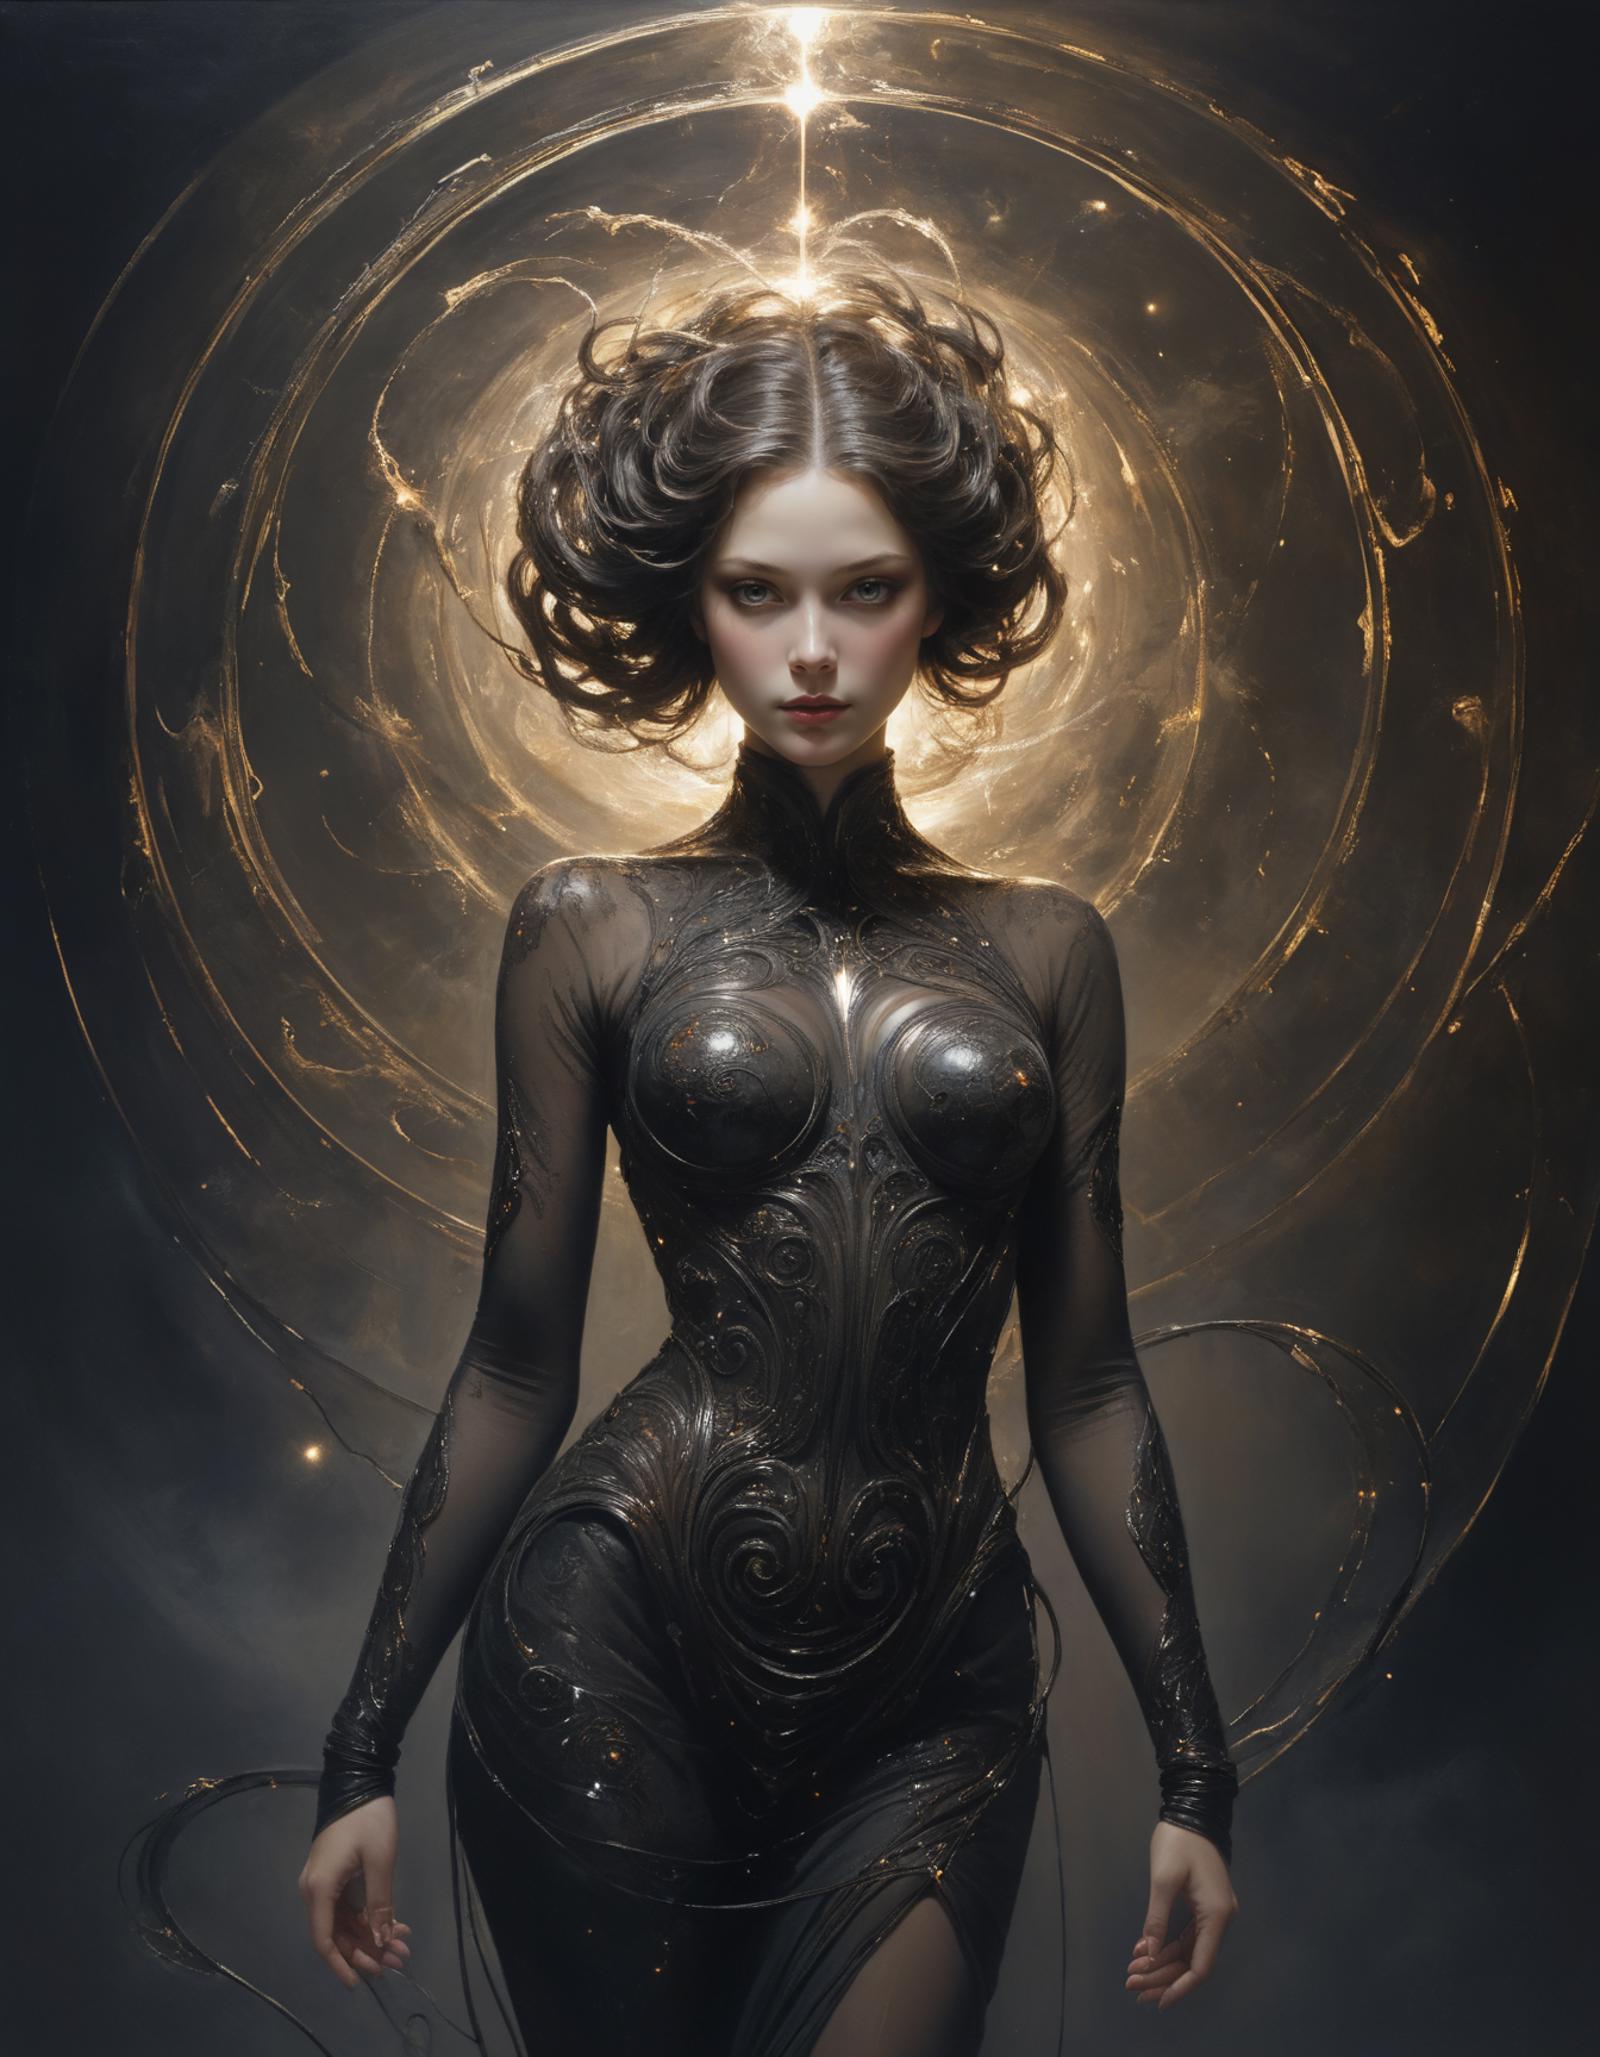 Artistic Digital Painting of a Woman with Long Hair and a Corset Dress